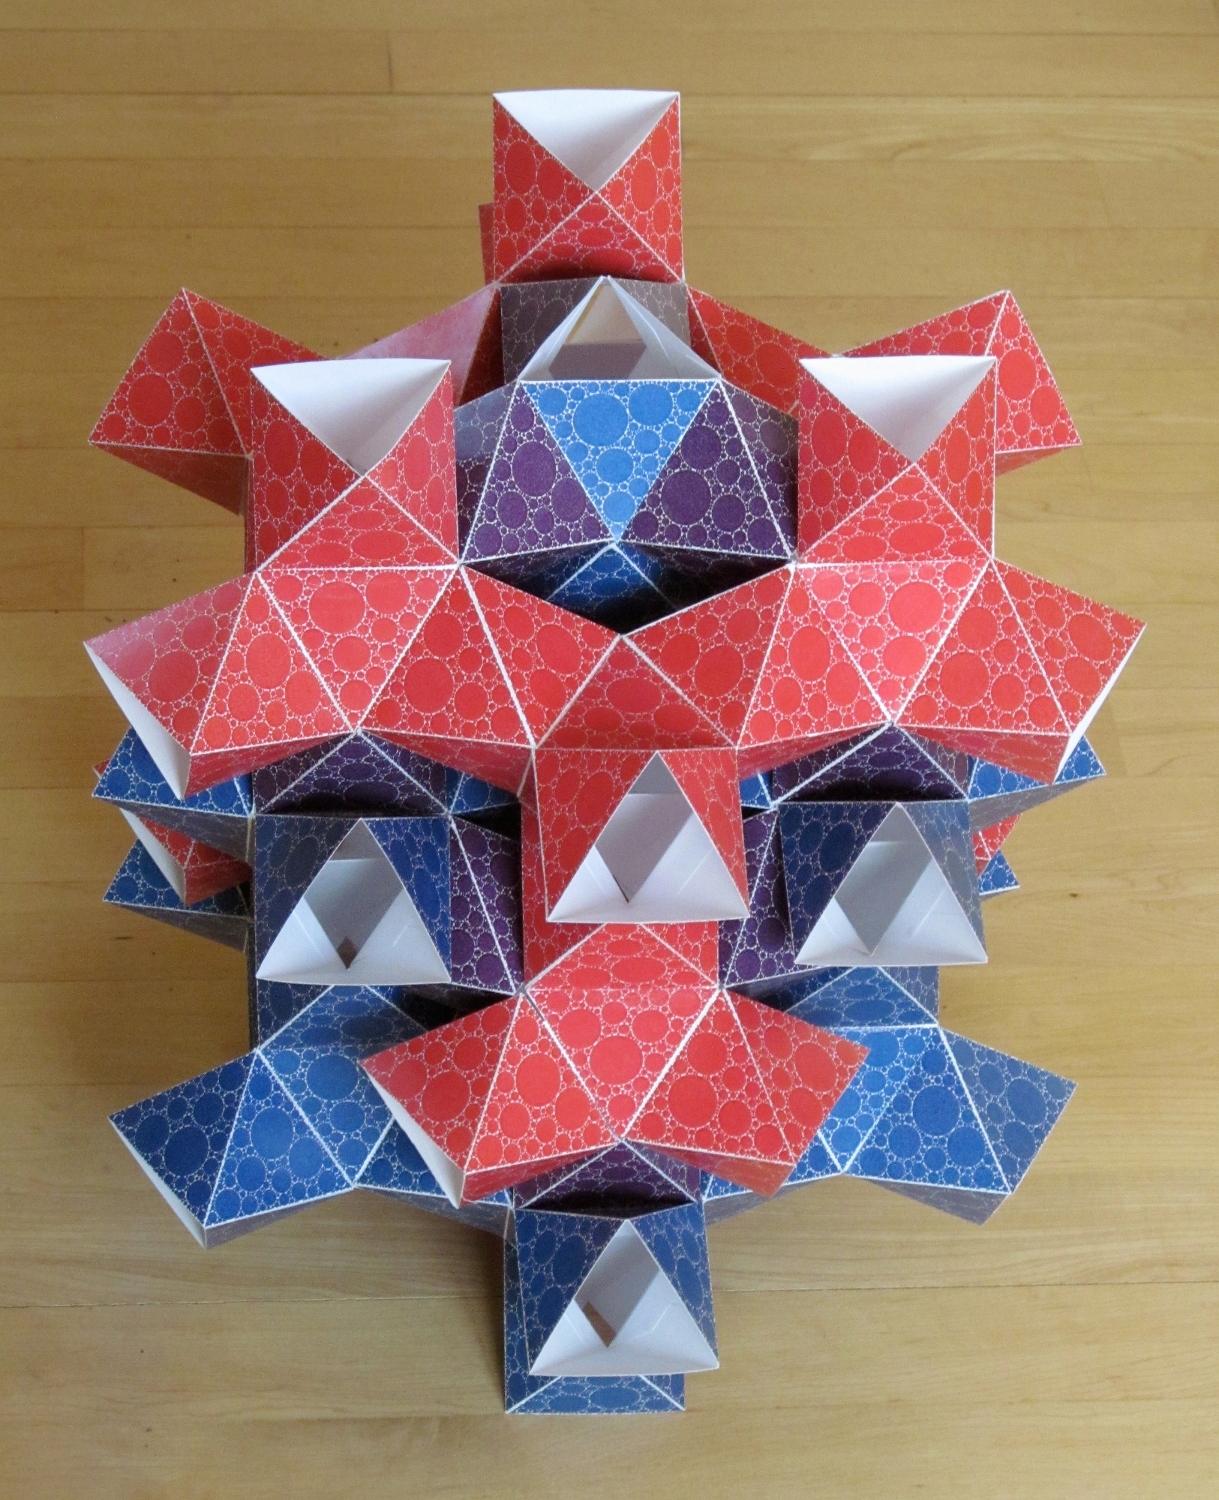 Image for entry 'The {3,12} Polyhedron Decorated with a Fractal Circle Pattern'